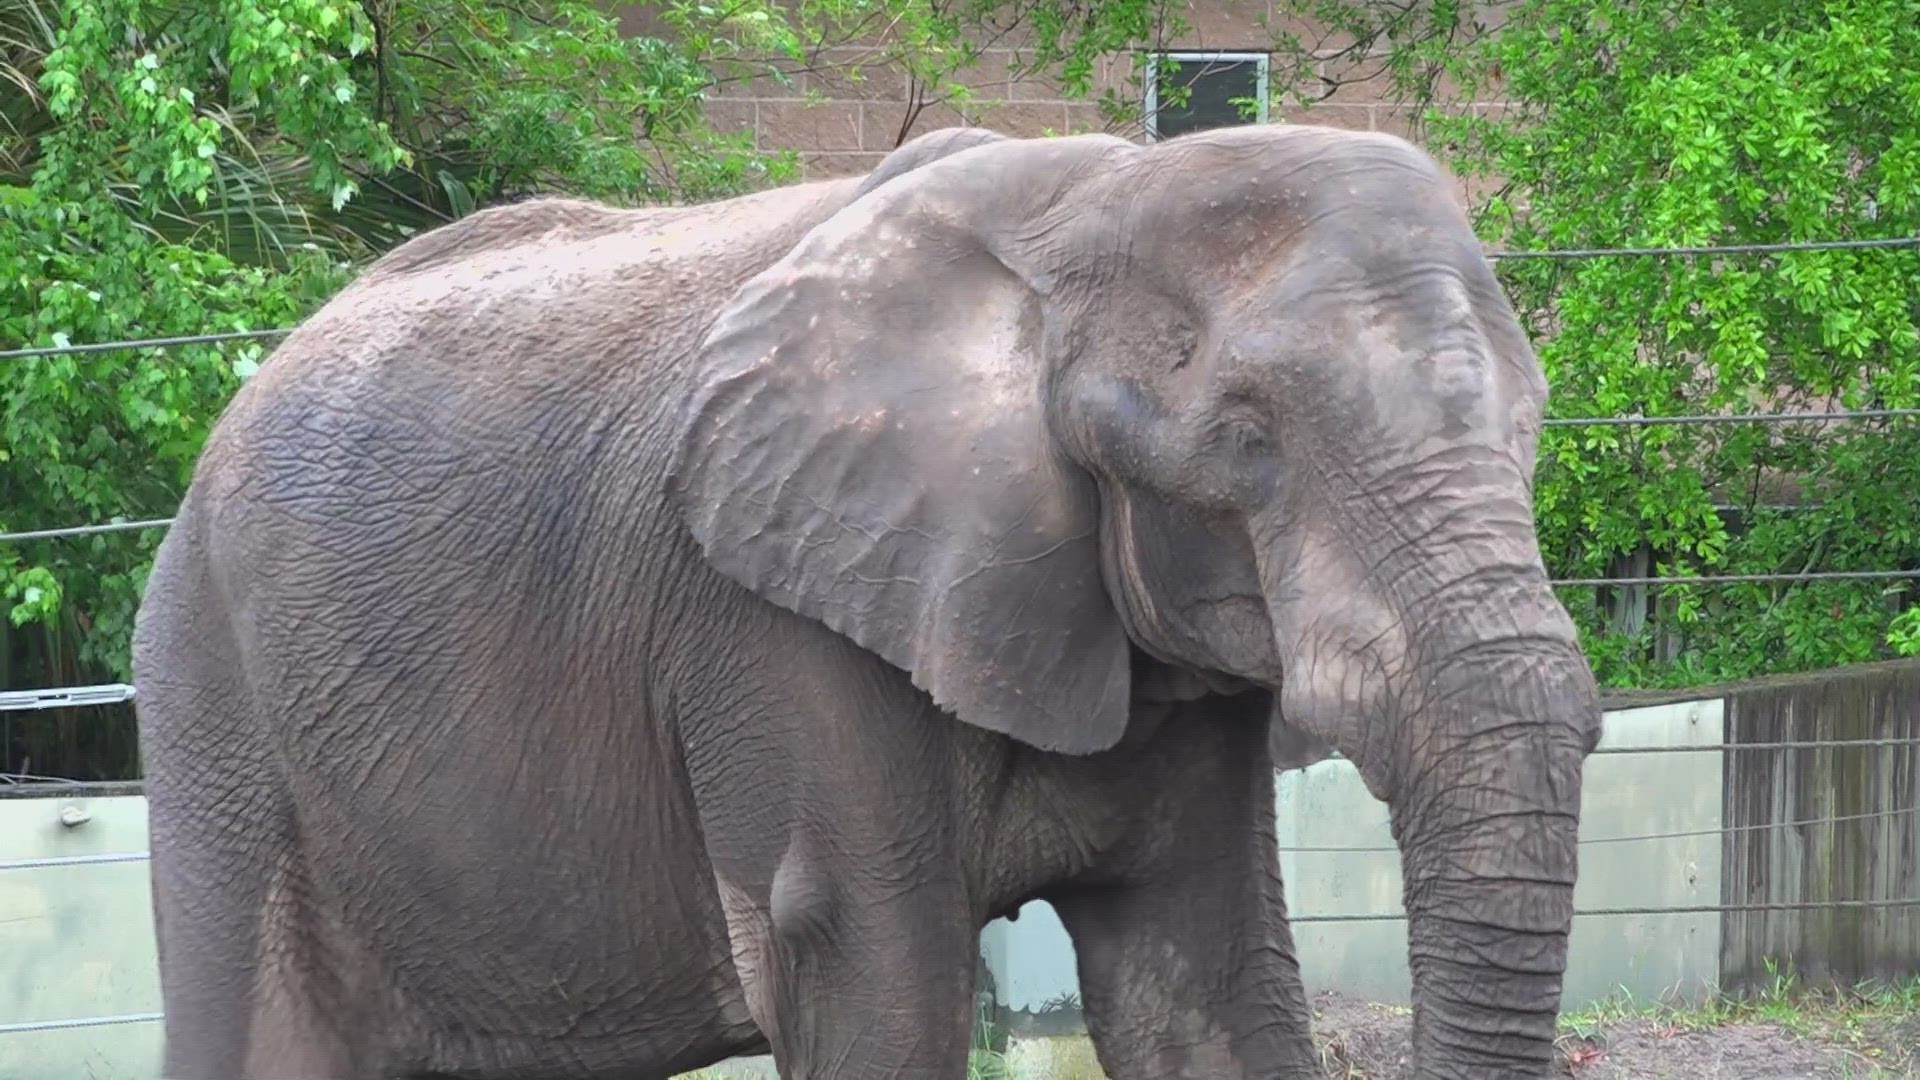 Ali, a 34-year-old African elephant, was donated to the zoo and rescued from Jackson’s 'Neverland Ranch' in 1997.